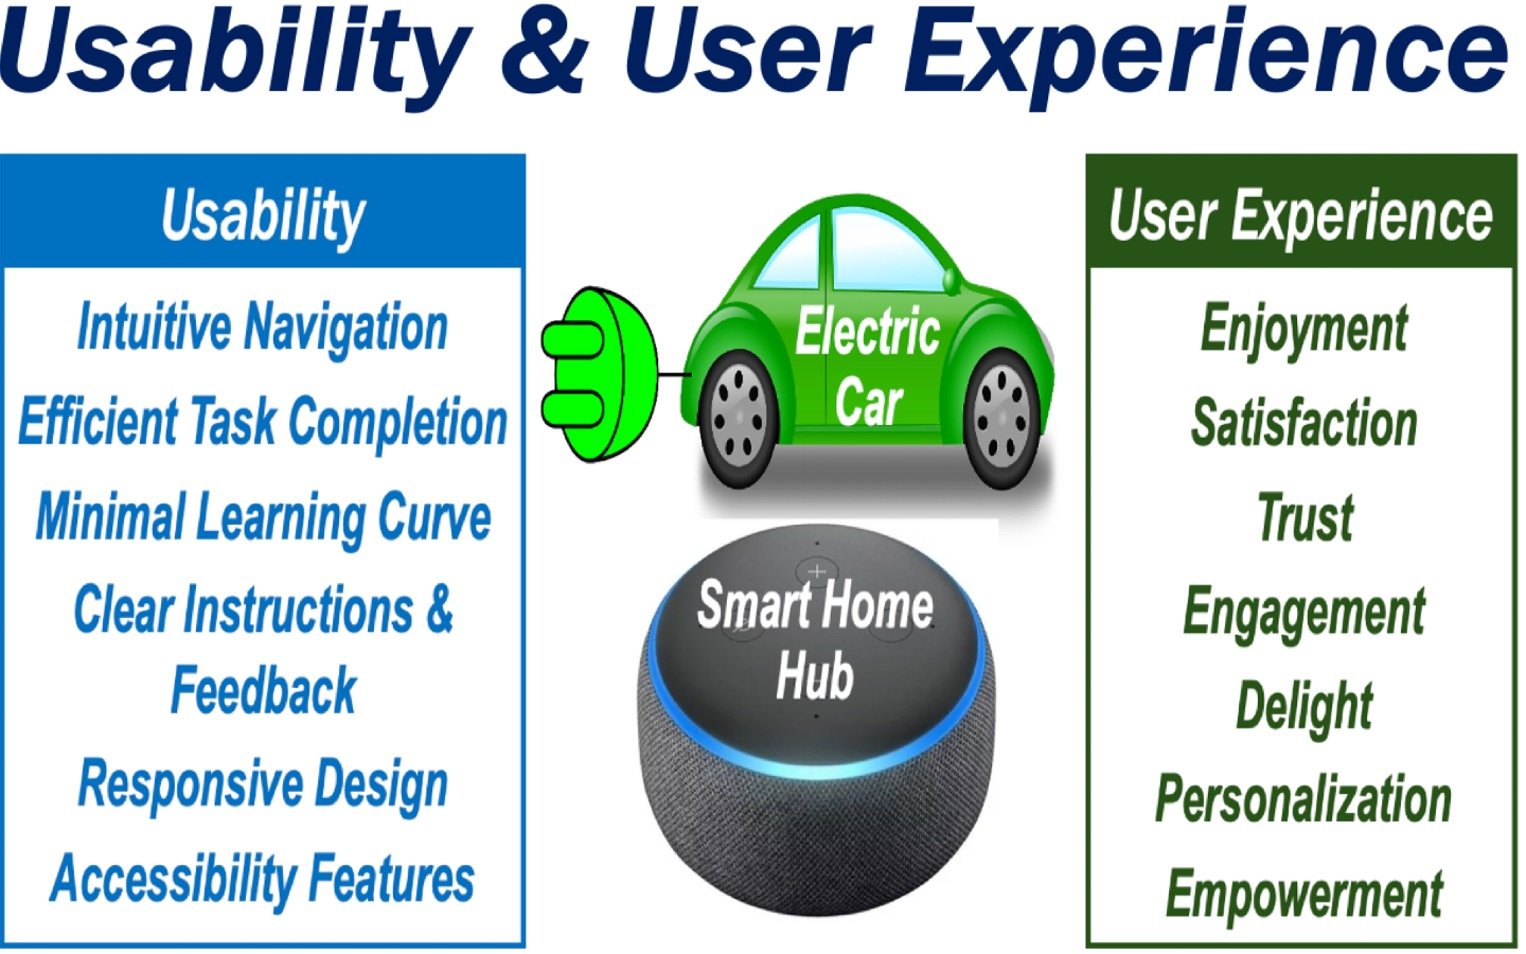 Usability and User Experience explained in images and keywords